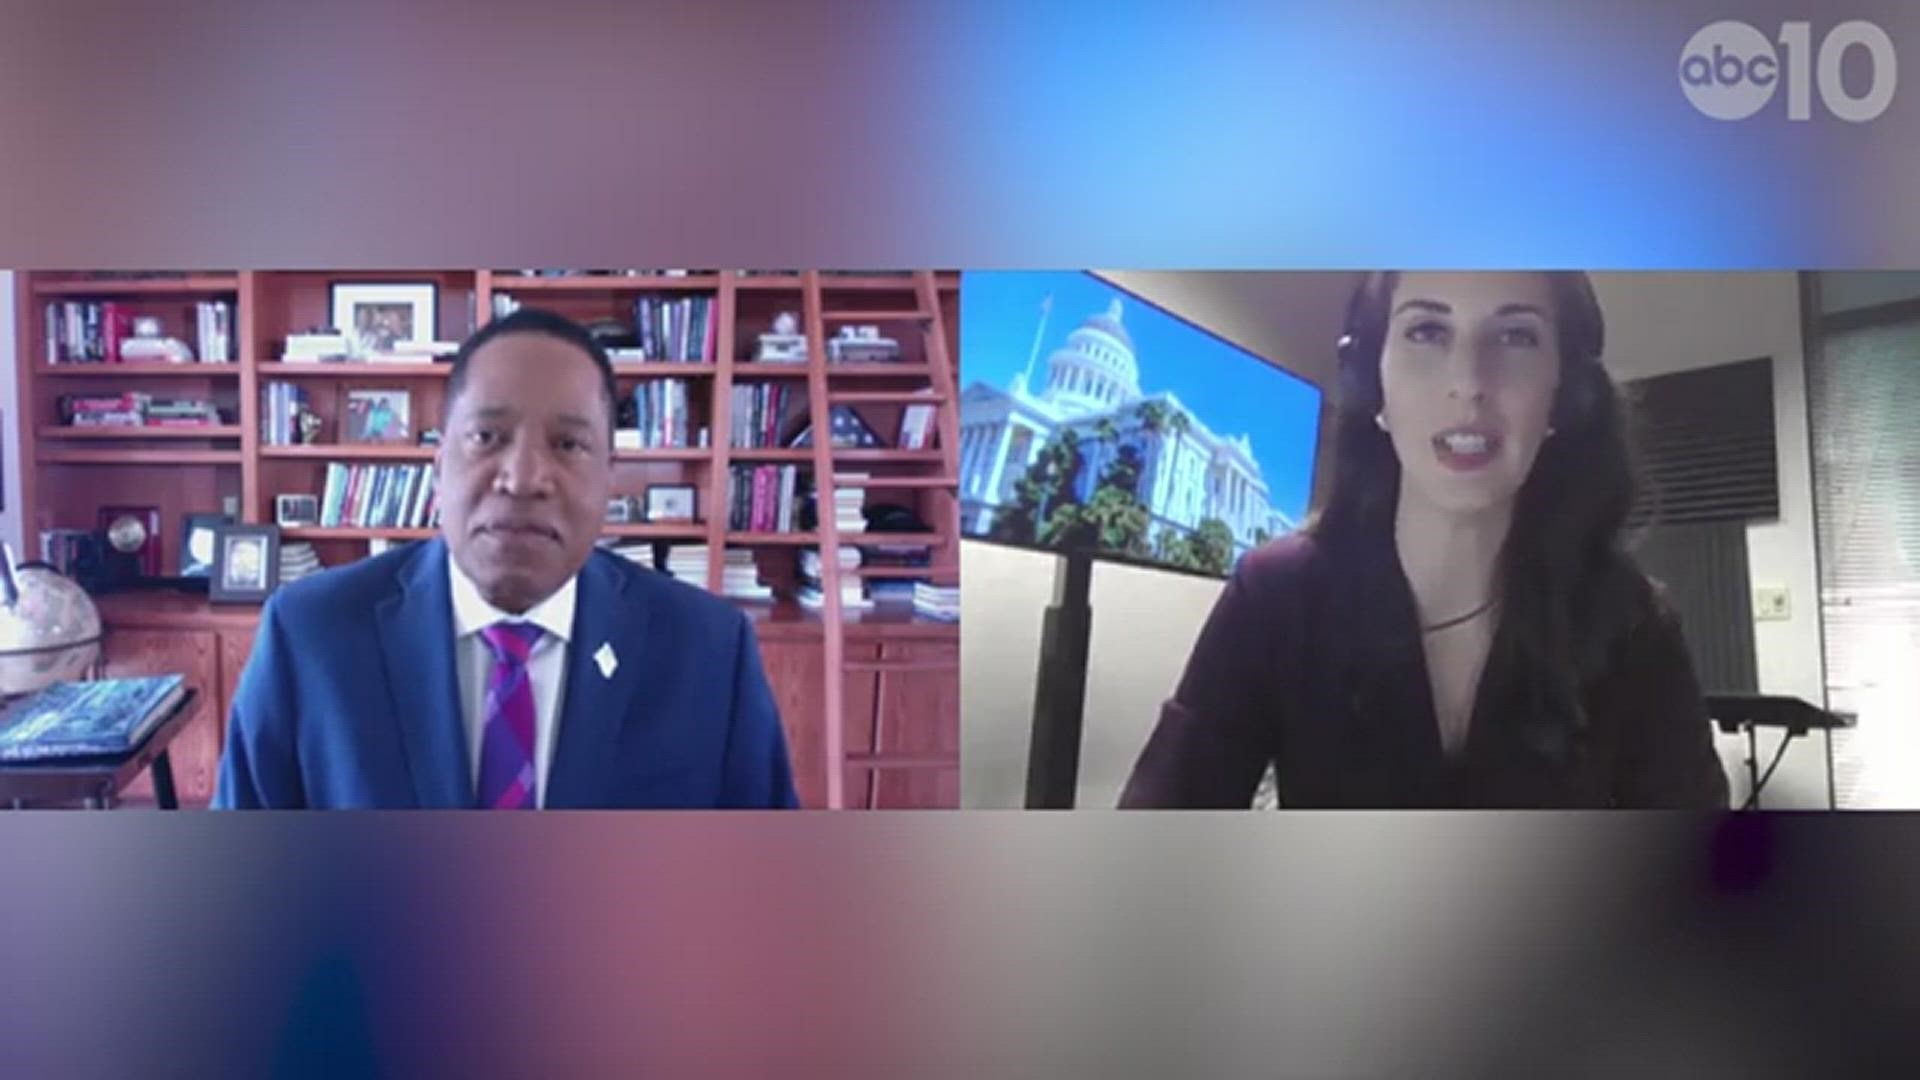 ABC10 political reporter Morgan Rynor spoke with gubernatorial candidate Larry Elder about various topics.